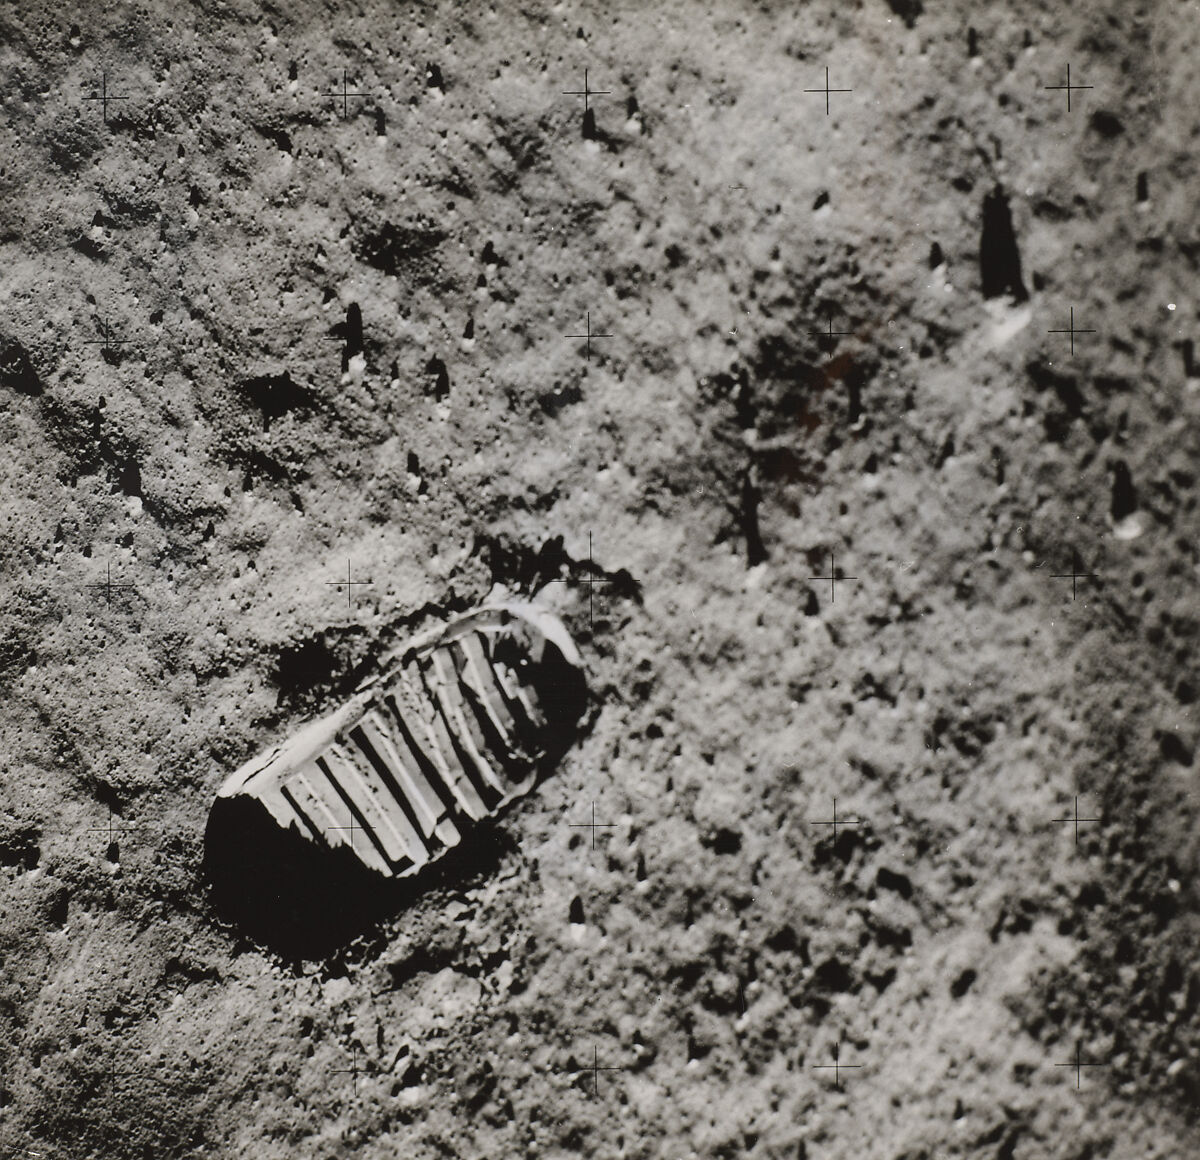 Buzz Aldrin's Footprint on the Surface of the Moon, National Aeronautics and Space Administration (NASA), Chromogenic print 